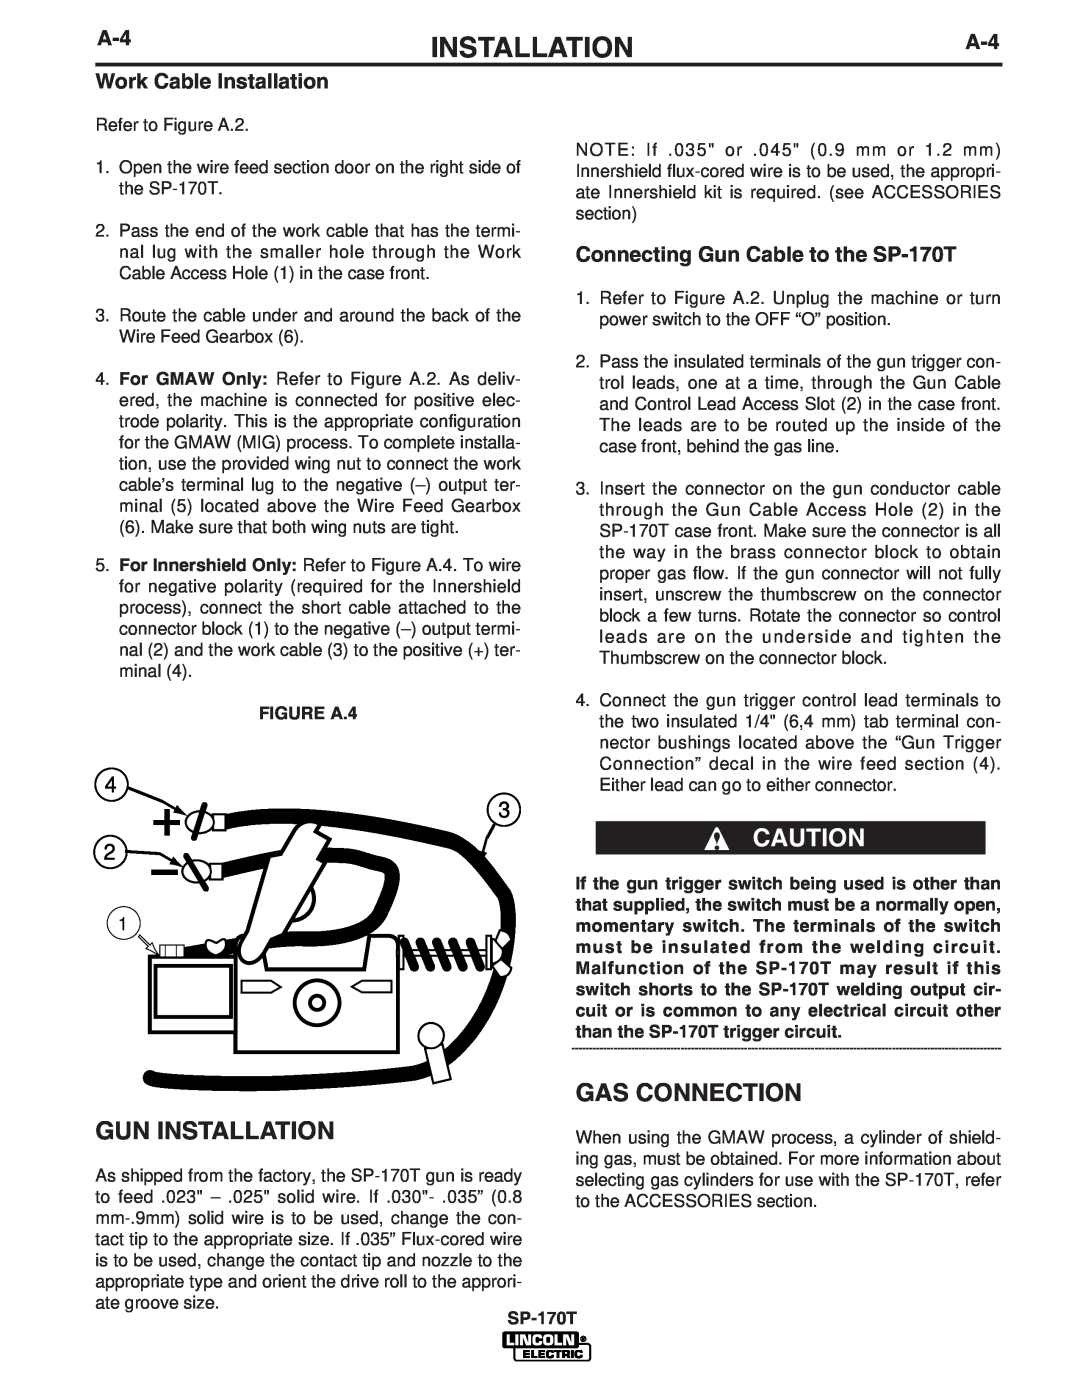 Lincoln Electric IM794 manual Gas Connection, Gun Installation, FIGURE A.4, SP-170T 